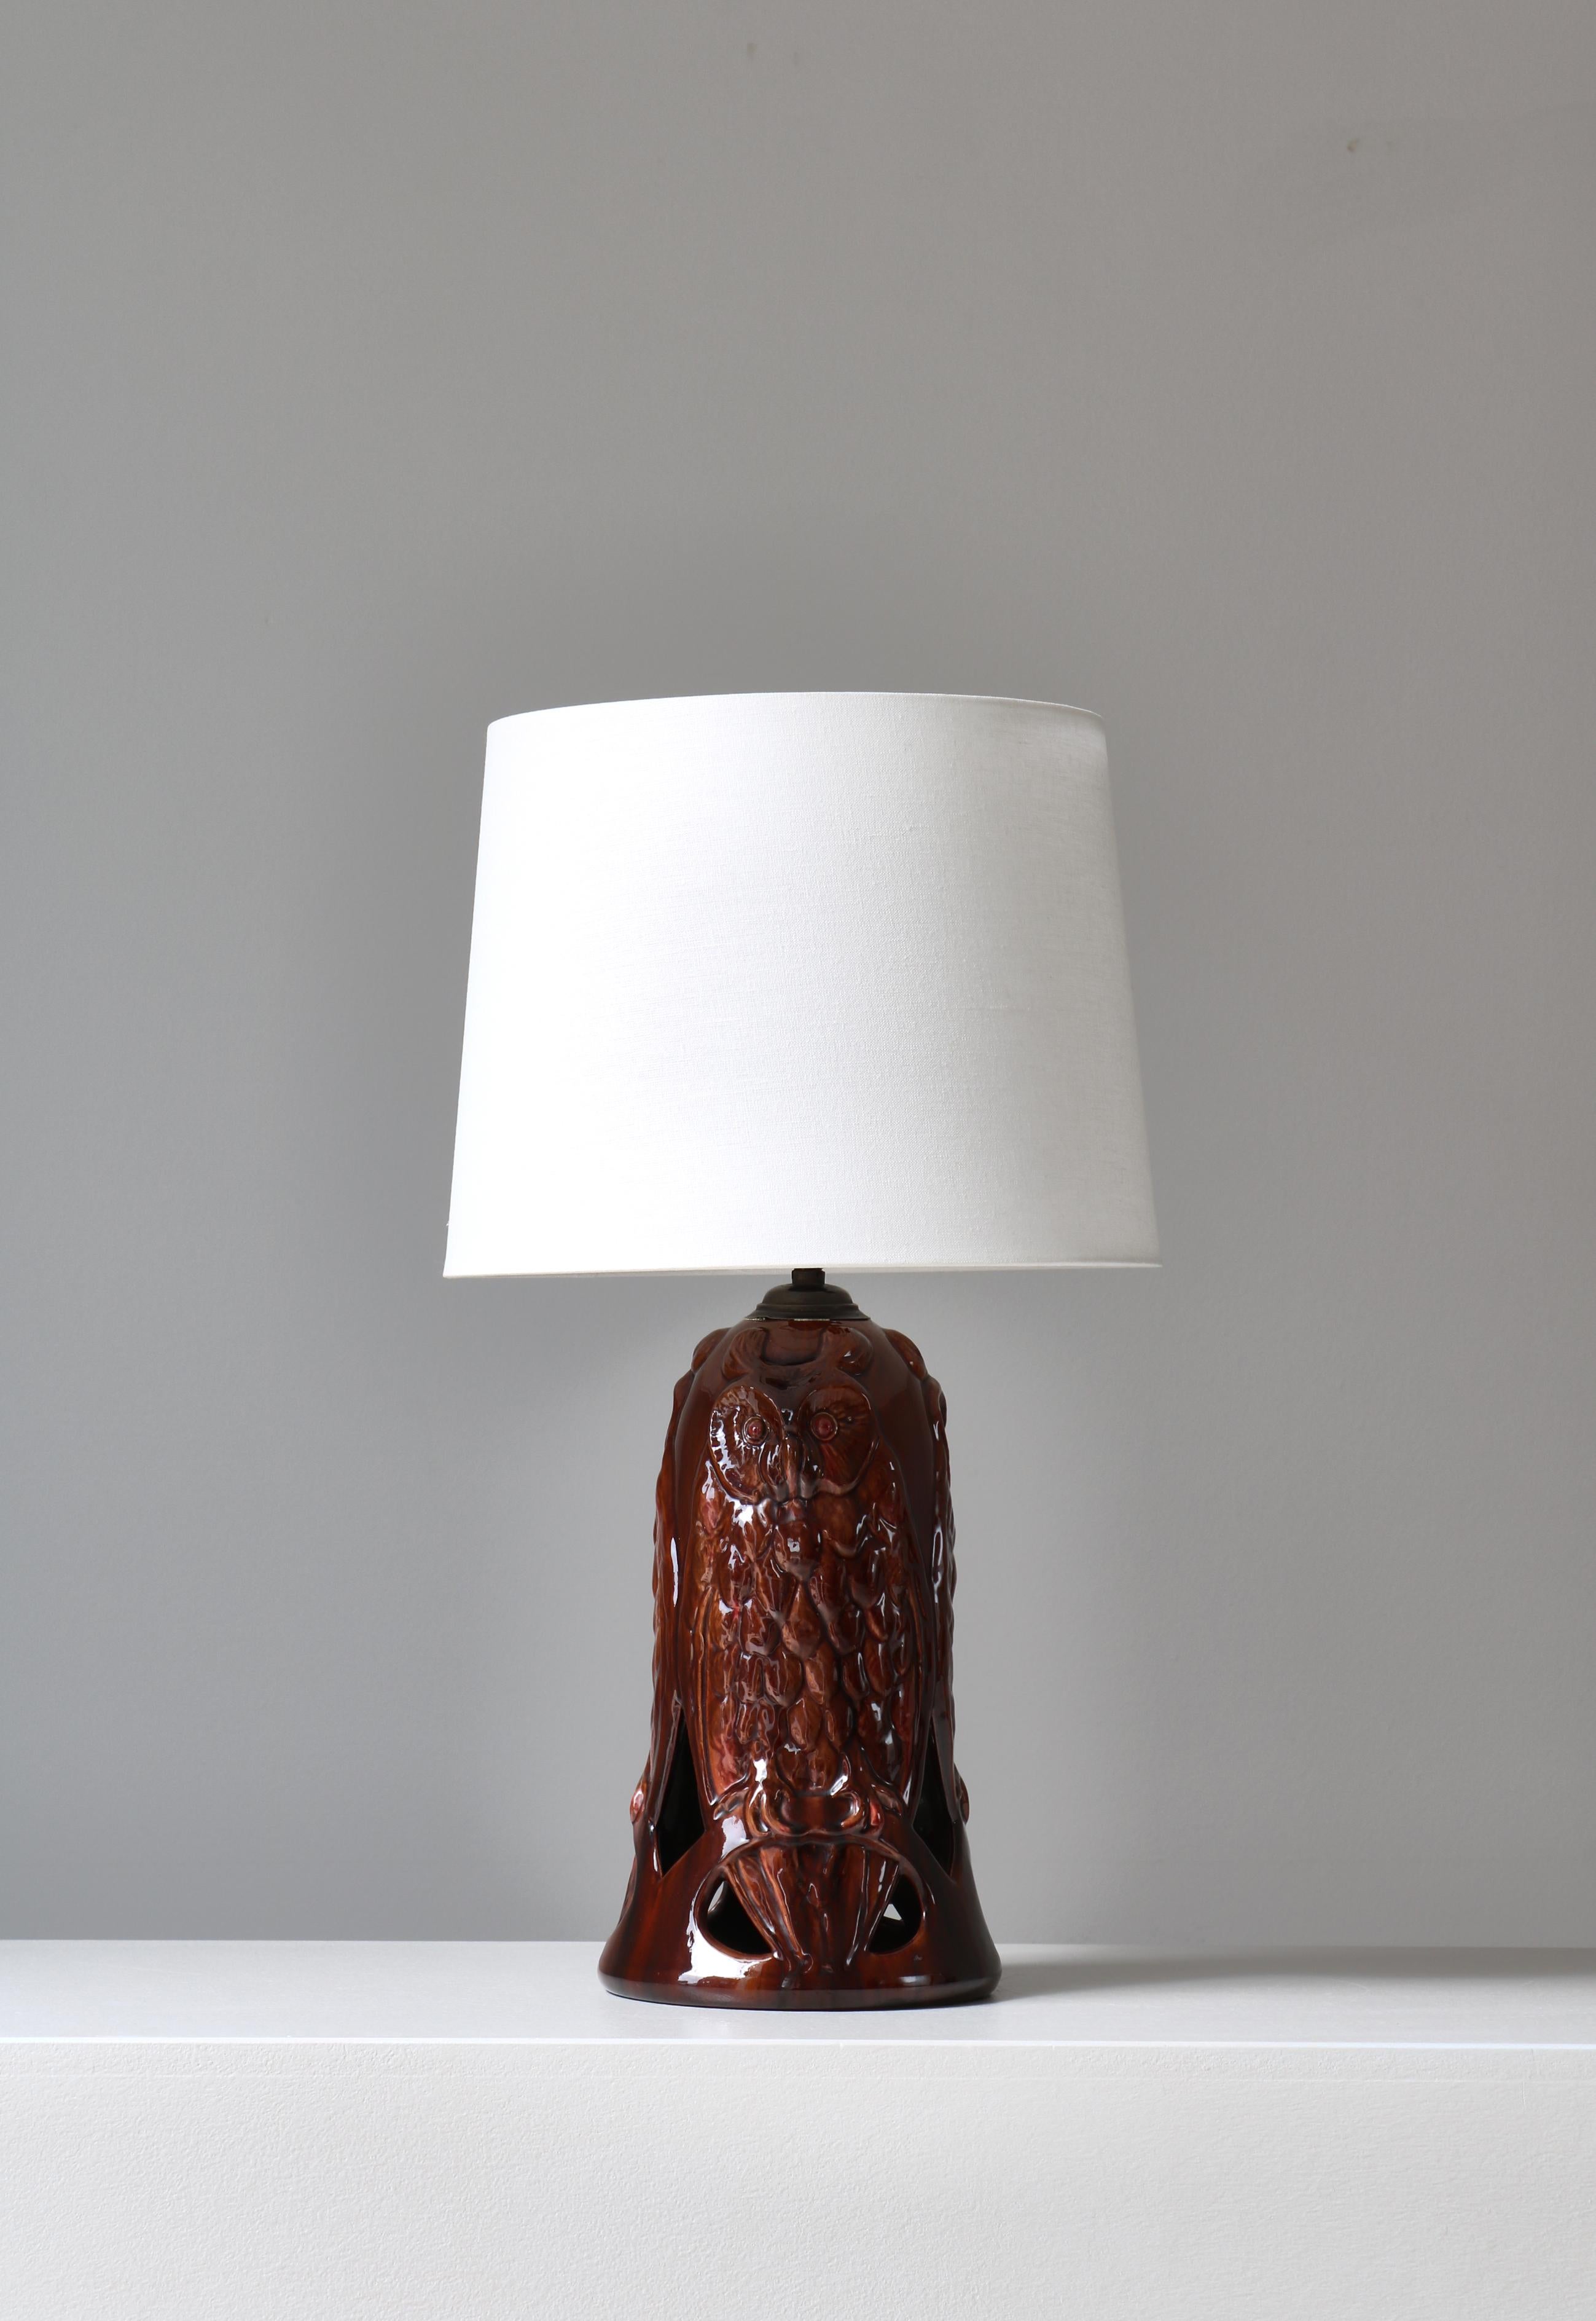 Wonderful ceramics table lamp made by Michael Andersen & Sons, Denmark in the 1920s. The earthenware lamp base was handmade and decorated with owl reliefs and expressive red glazing. Stamped underneath 